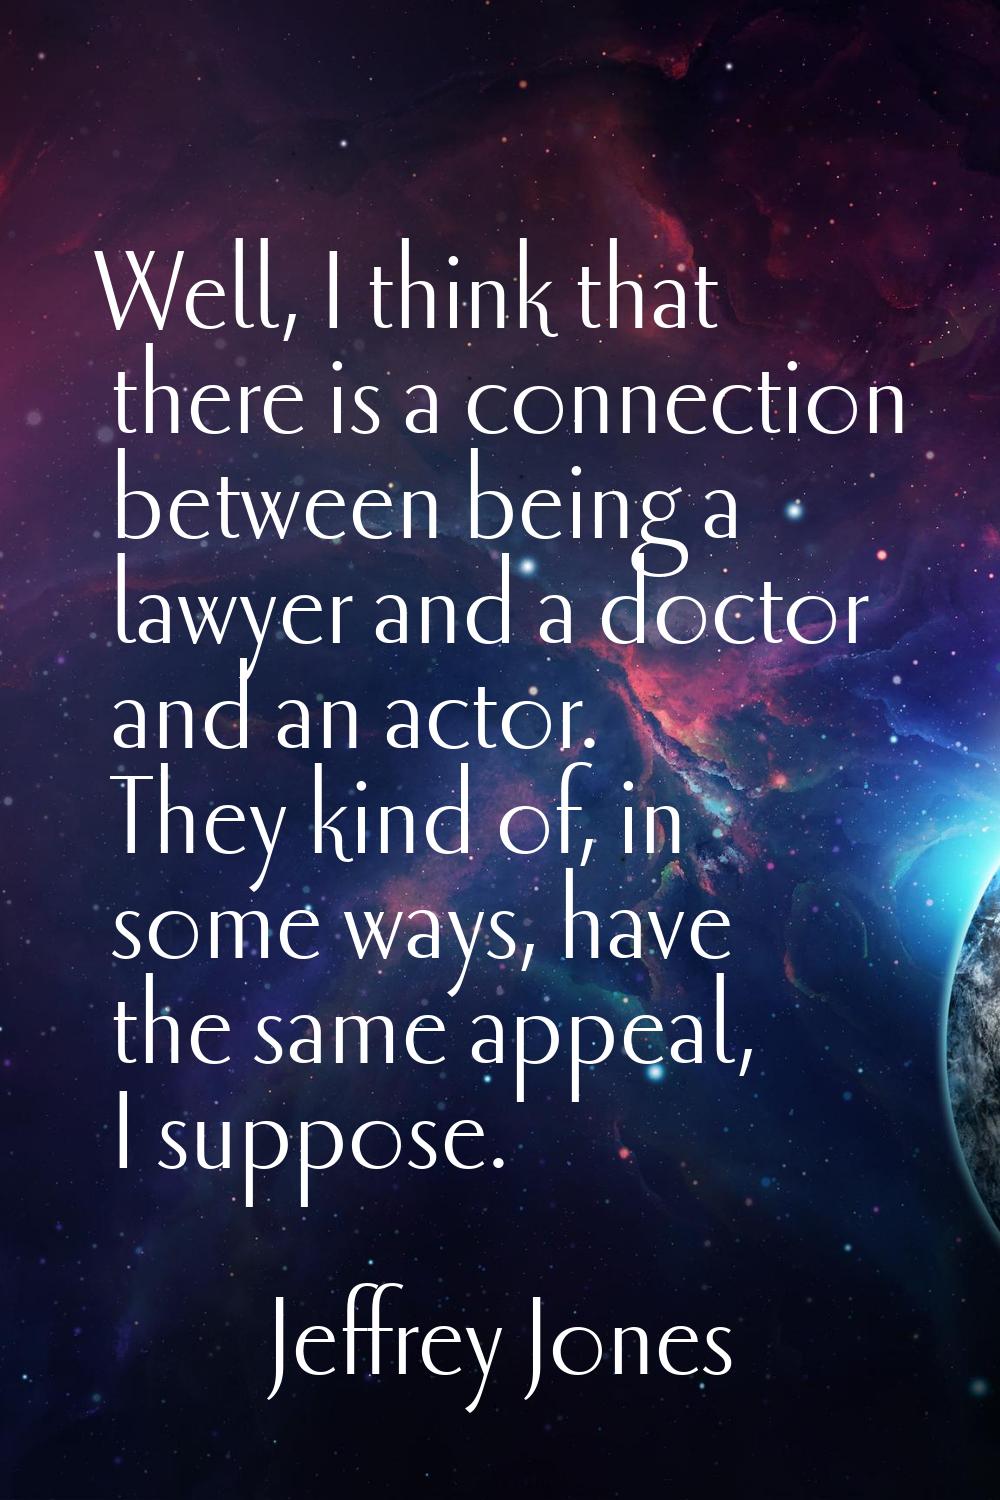 Well, I think that there is a connection between being a lawyer and a doctor and an actor. They kin